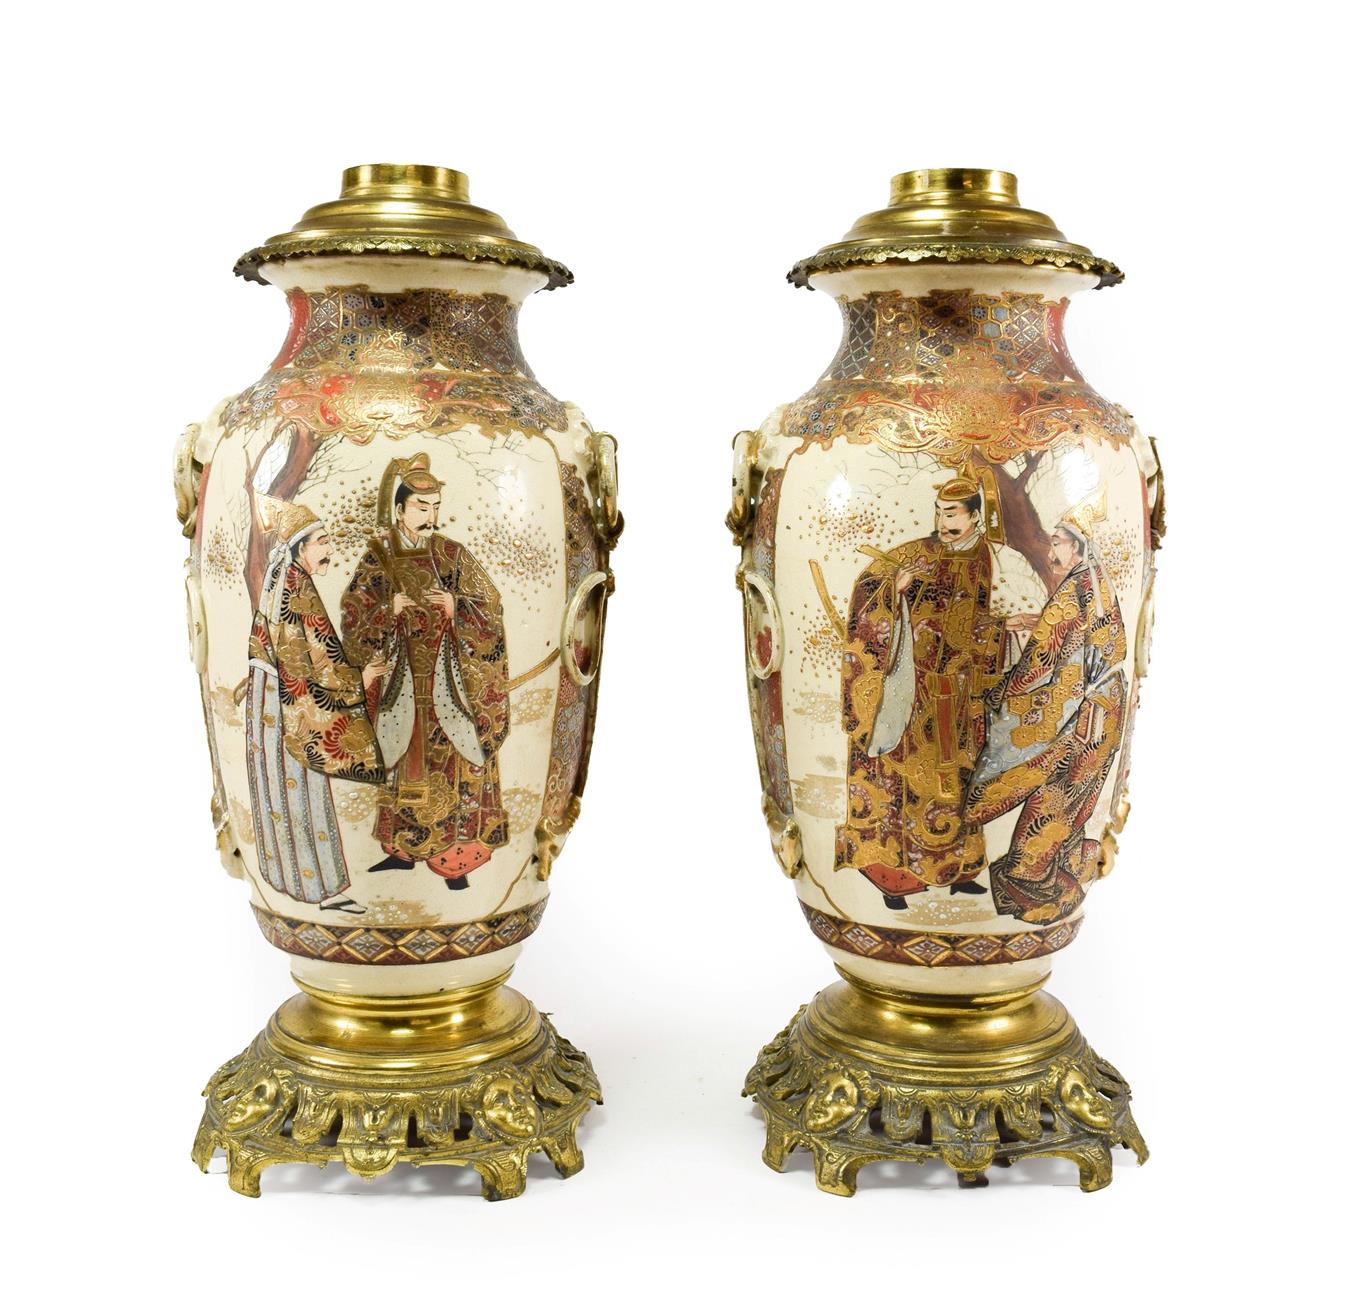 Lot 93 - A Pair of Metal Mounted Satsuma Type Earthenware Vases, early 20th century, of baluster form...